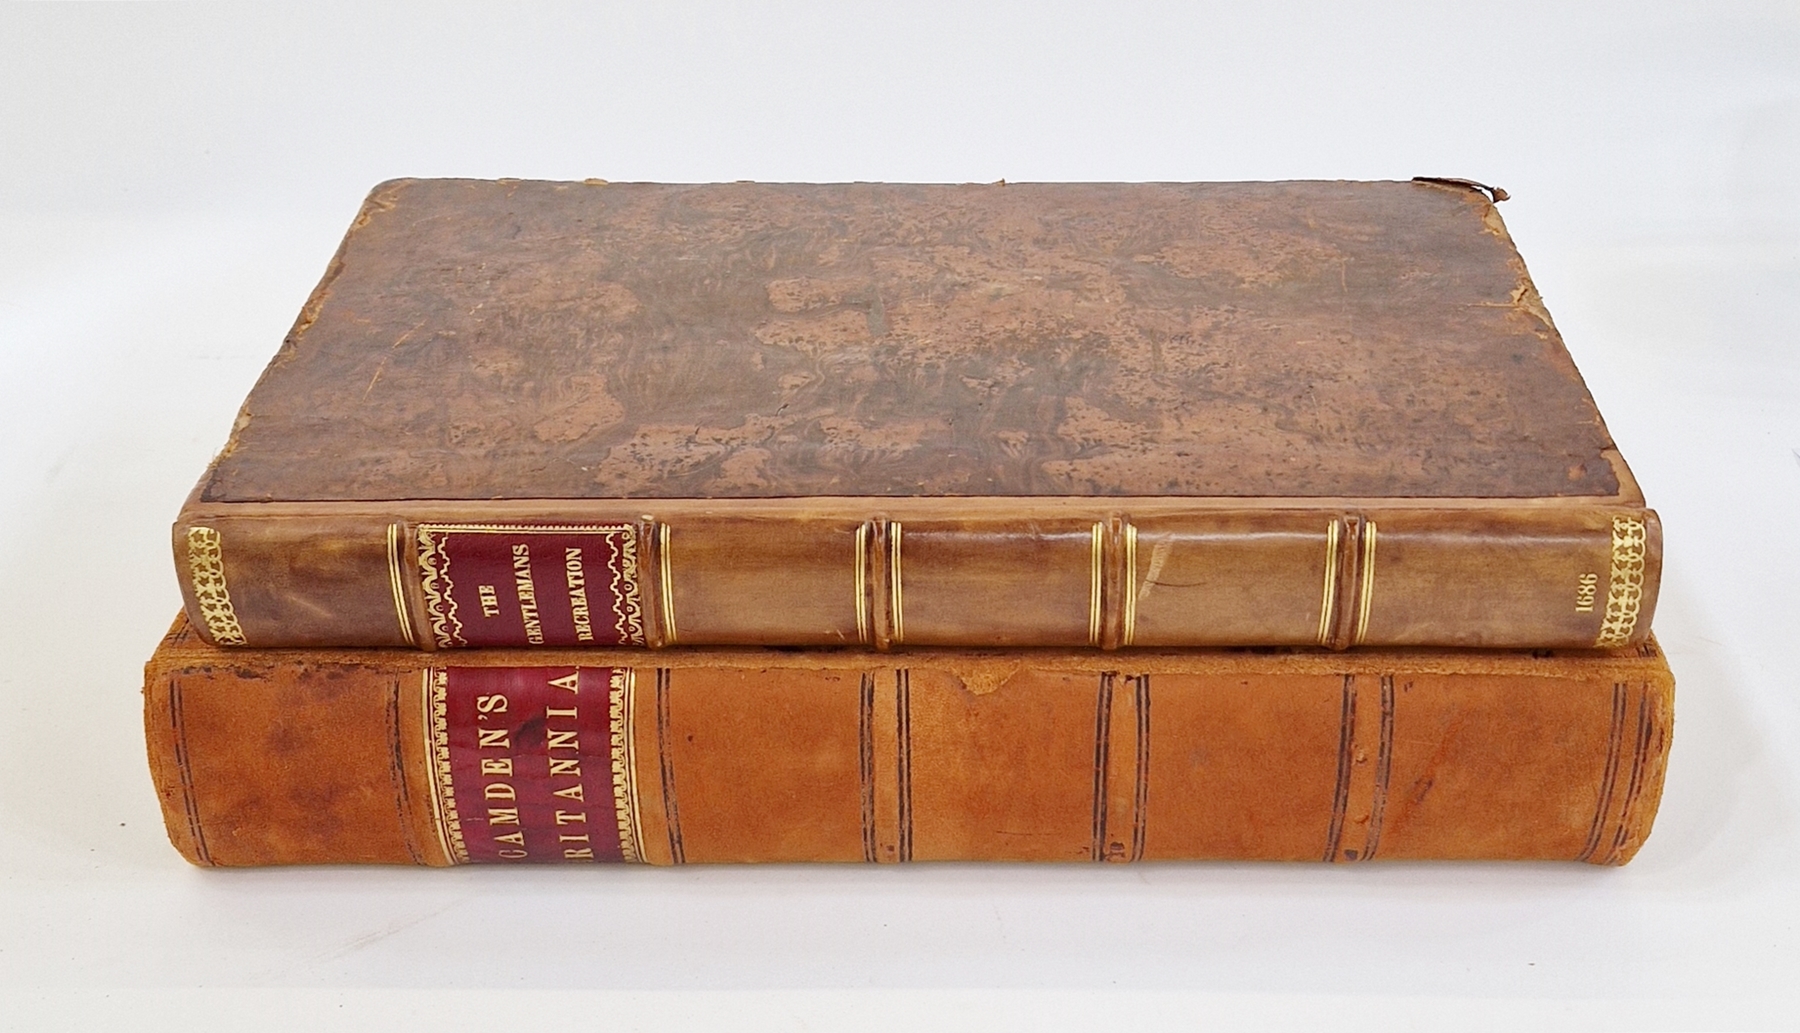 Two antiquarian volumes - lacking all plates and maps - Camden, William  "Camden's Britannia Newly